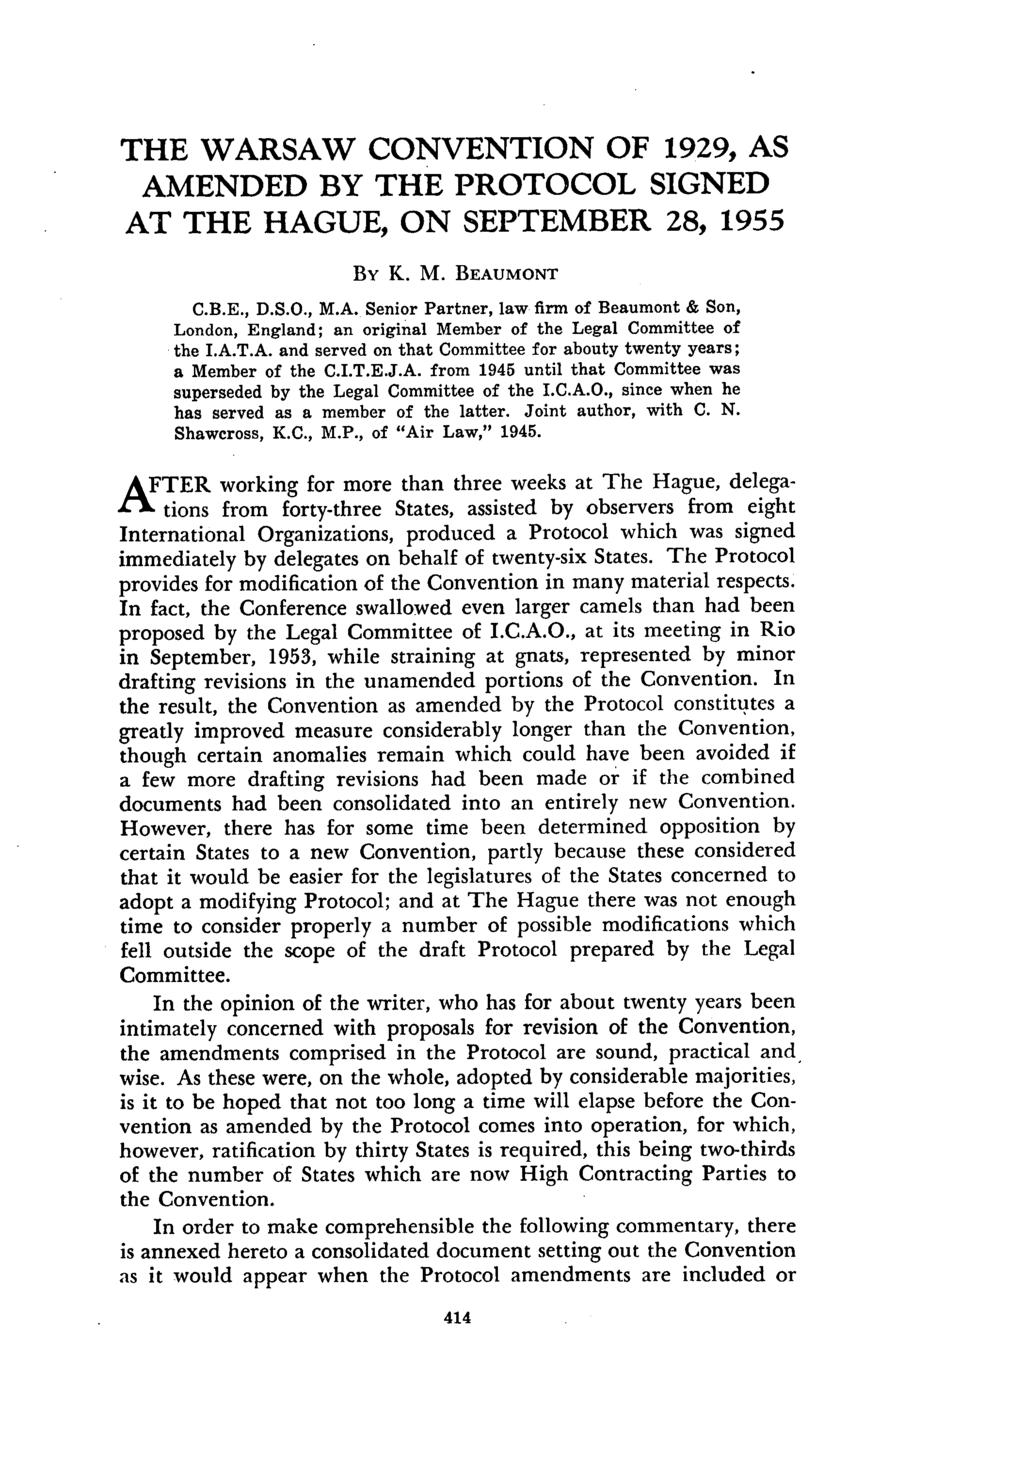 THE WARSAW CONVENTION OF 1929, AS AMENDED BY THE PROTOCOL SIGNED AT THE HAGUE, ON SEPTEMBER 28, 1955 By K. M. BEAUMONT C.B.E., D.S.O., M.A. Senior Partner, law firm of Beaumont & Son, London, England; an original Member of the Legal Committee of the I.